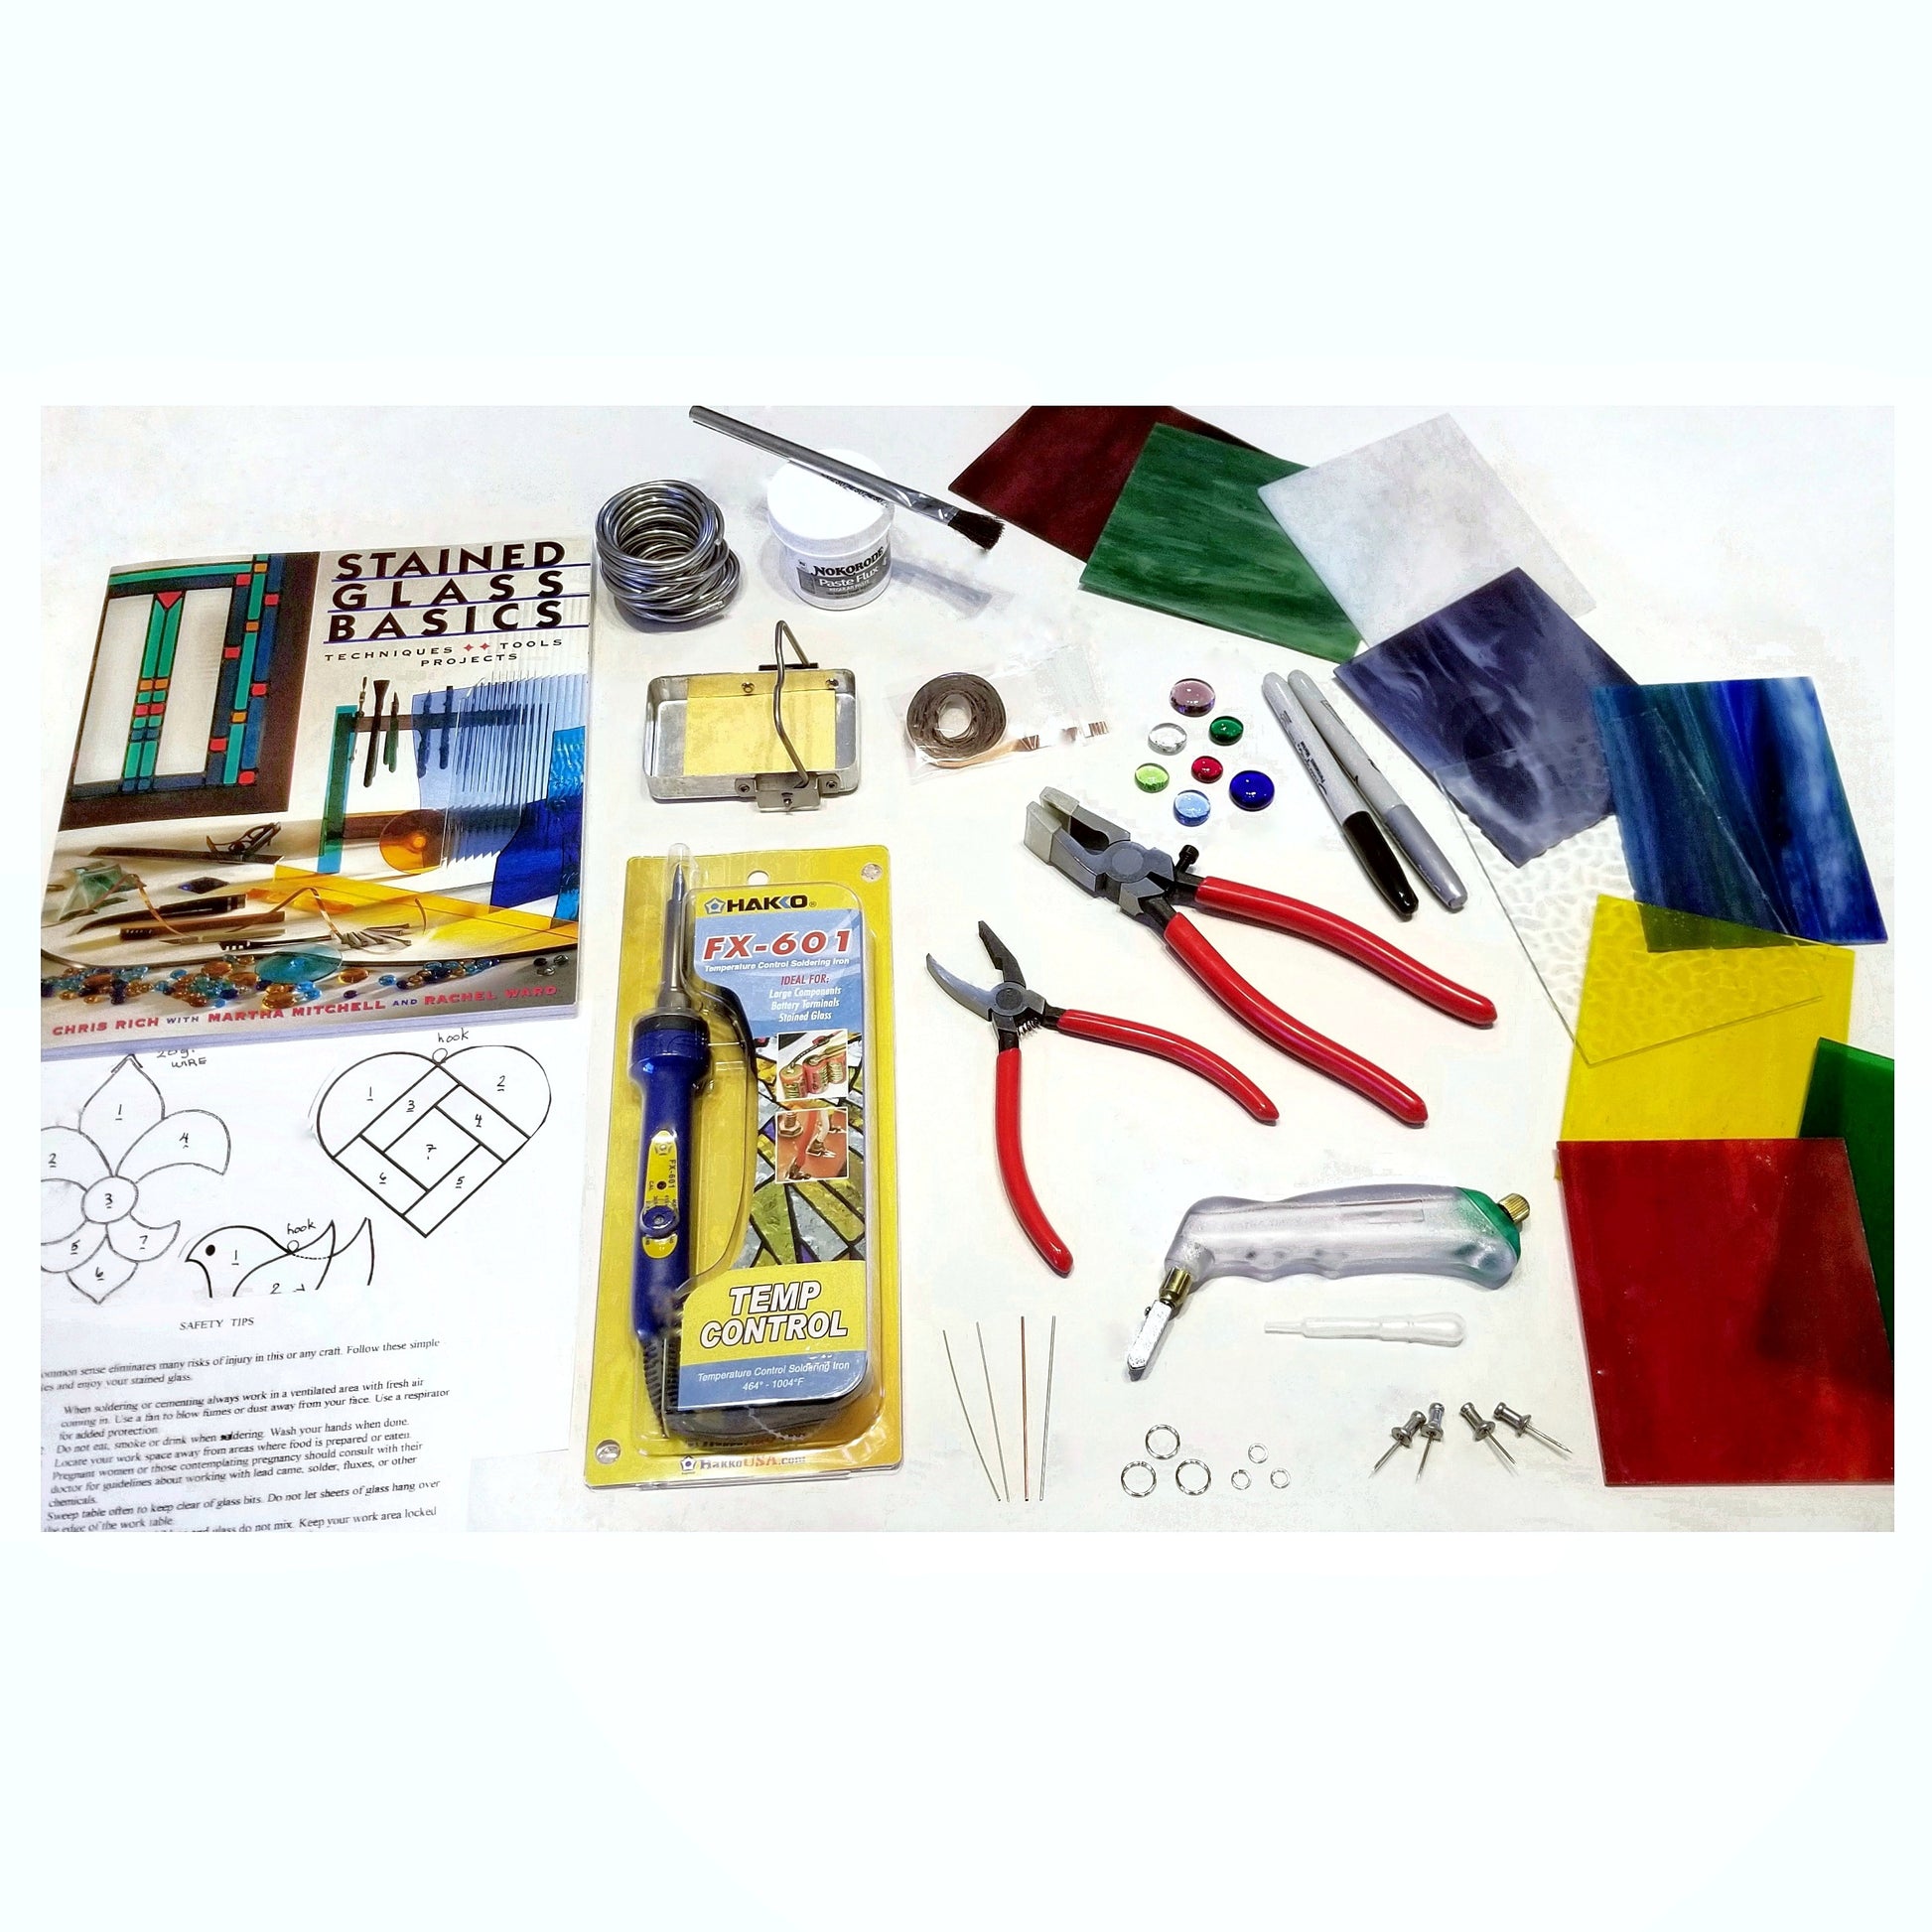 Best Solder for Stained Glass [Top 5 Reviews & Buying Guide